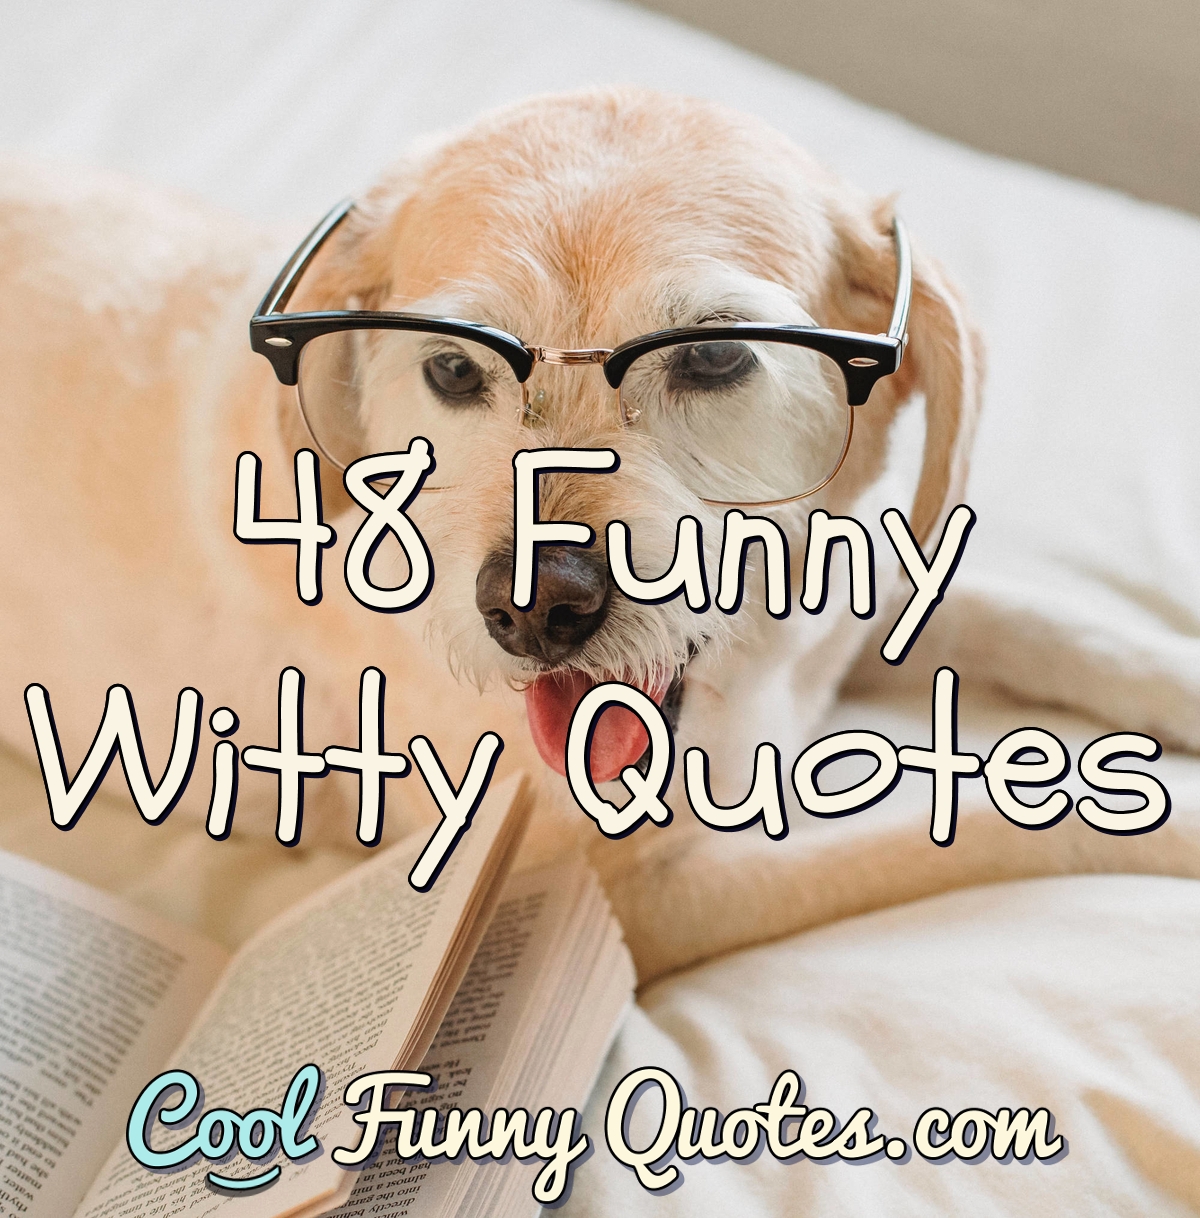 quirky quotes